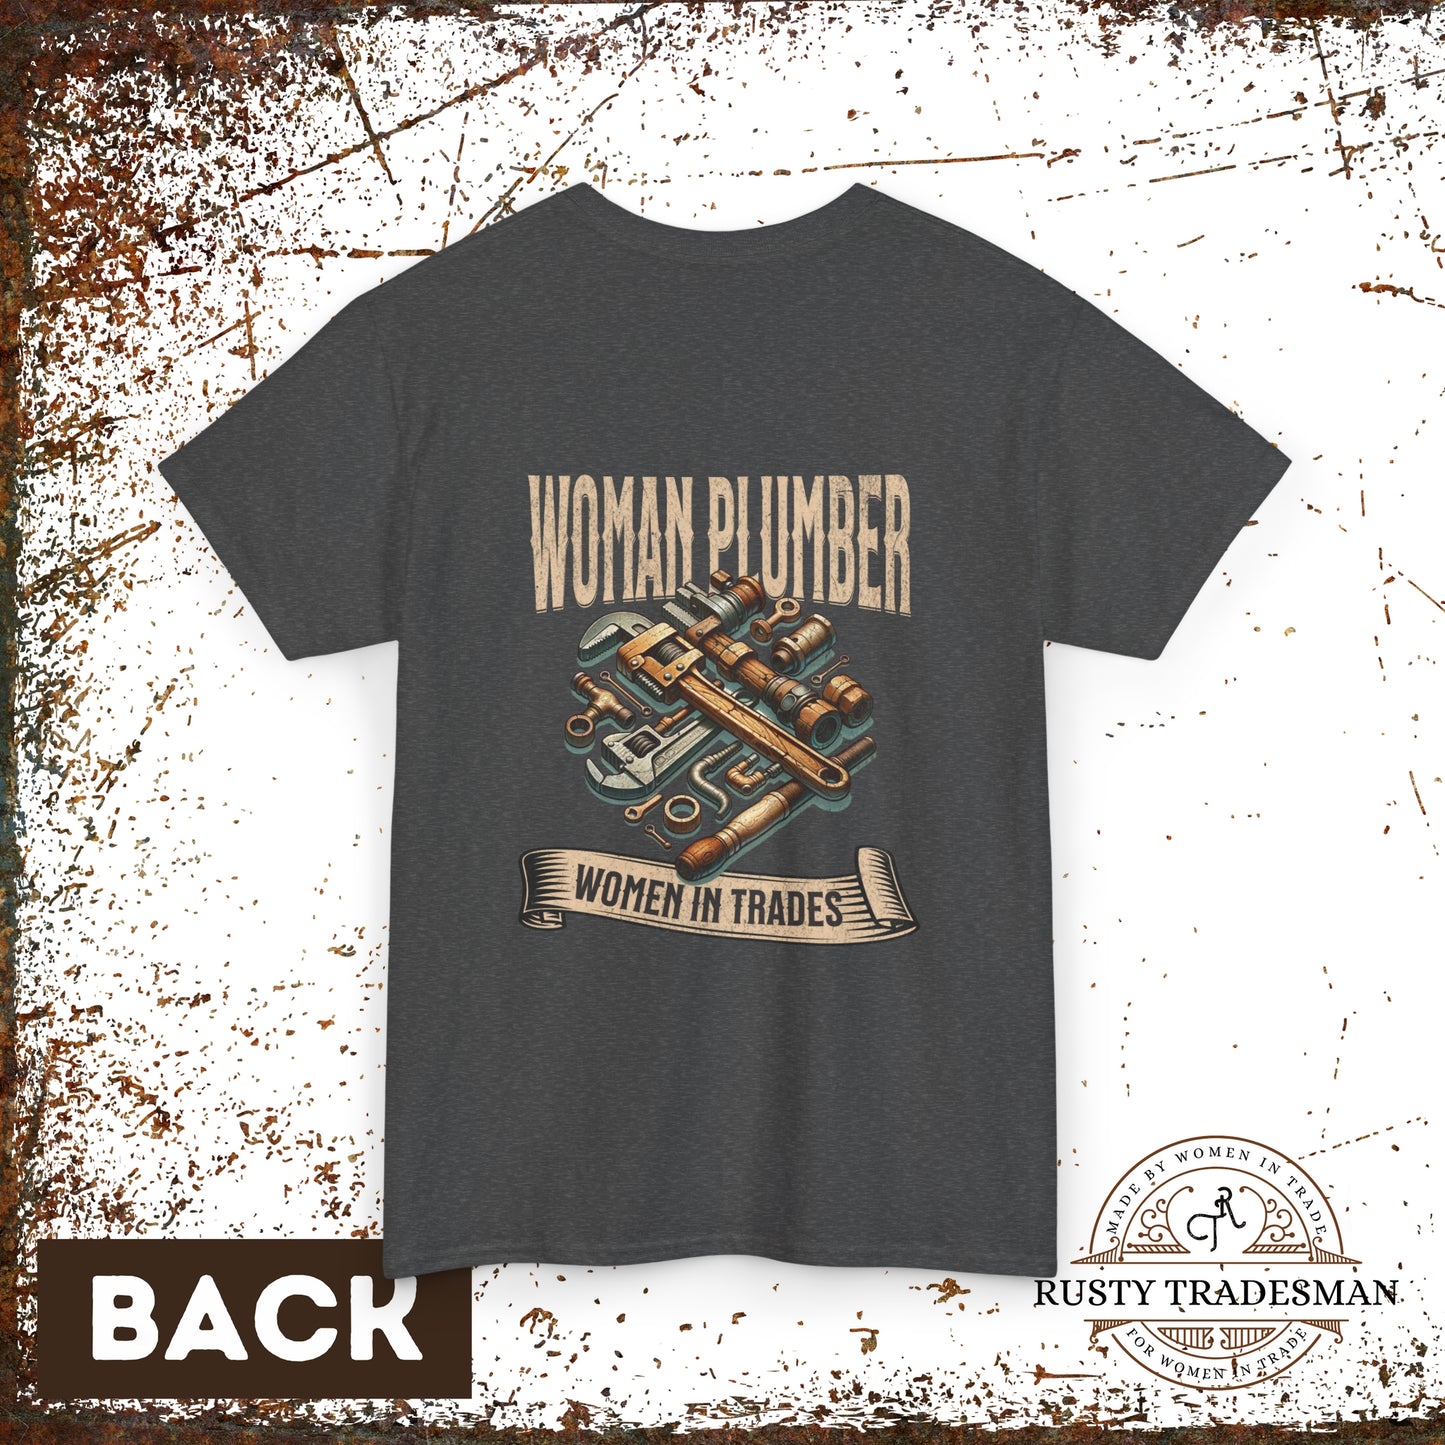 Woman Plumber Woman in Trades T-Shirt